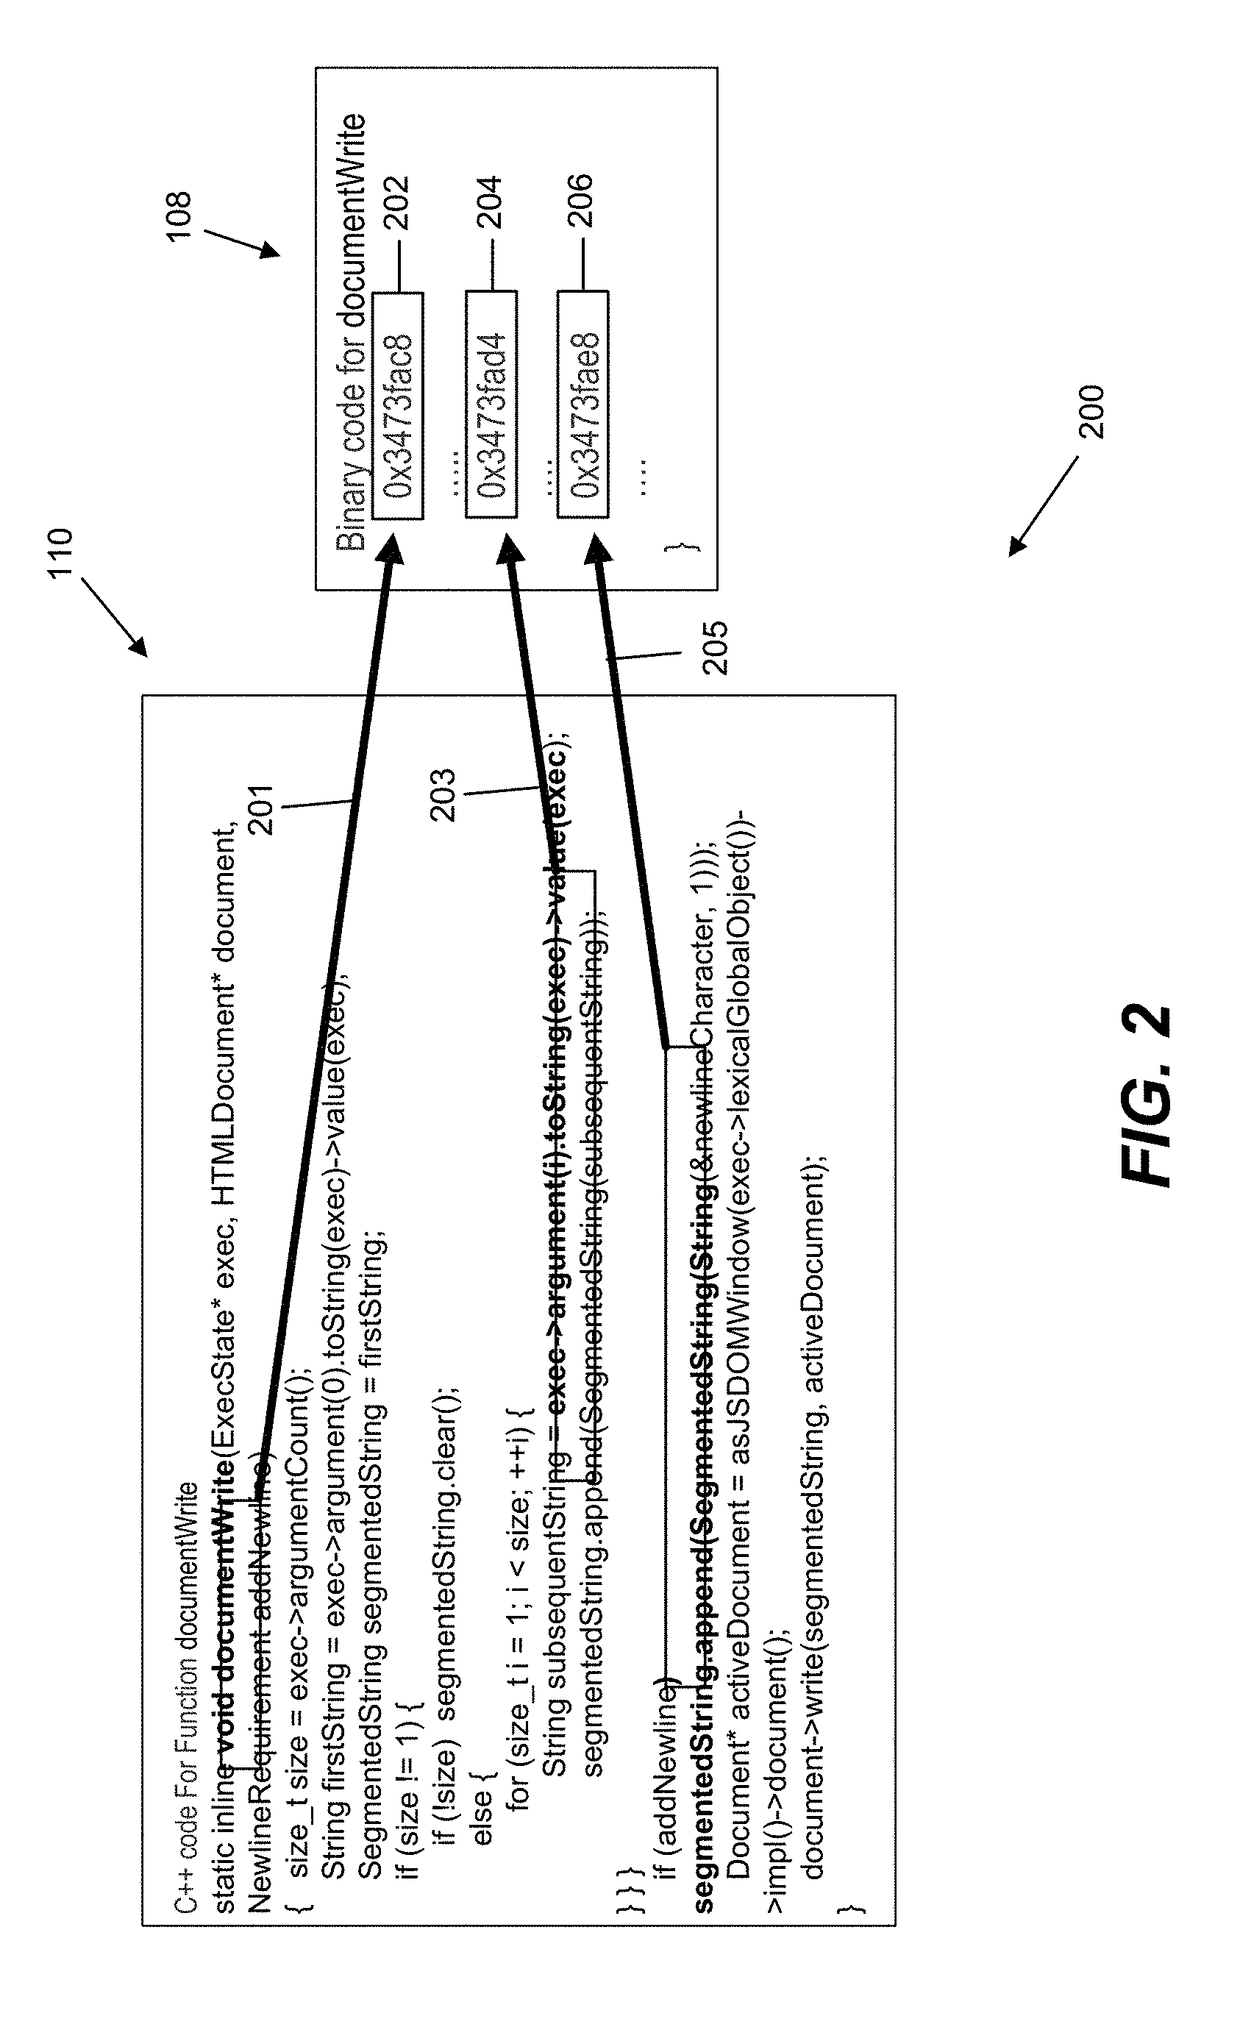 Kernel-based detection of target application functionality using virtual address mapping